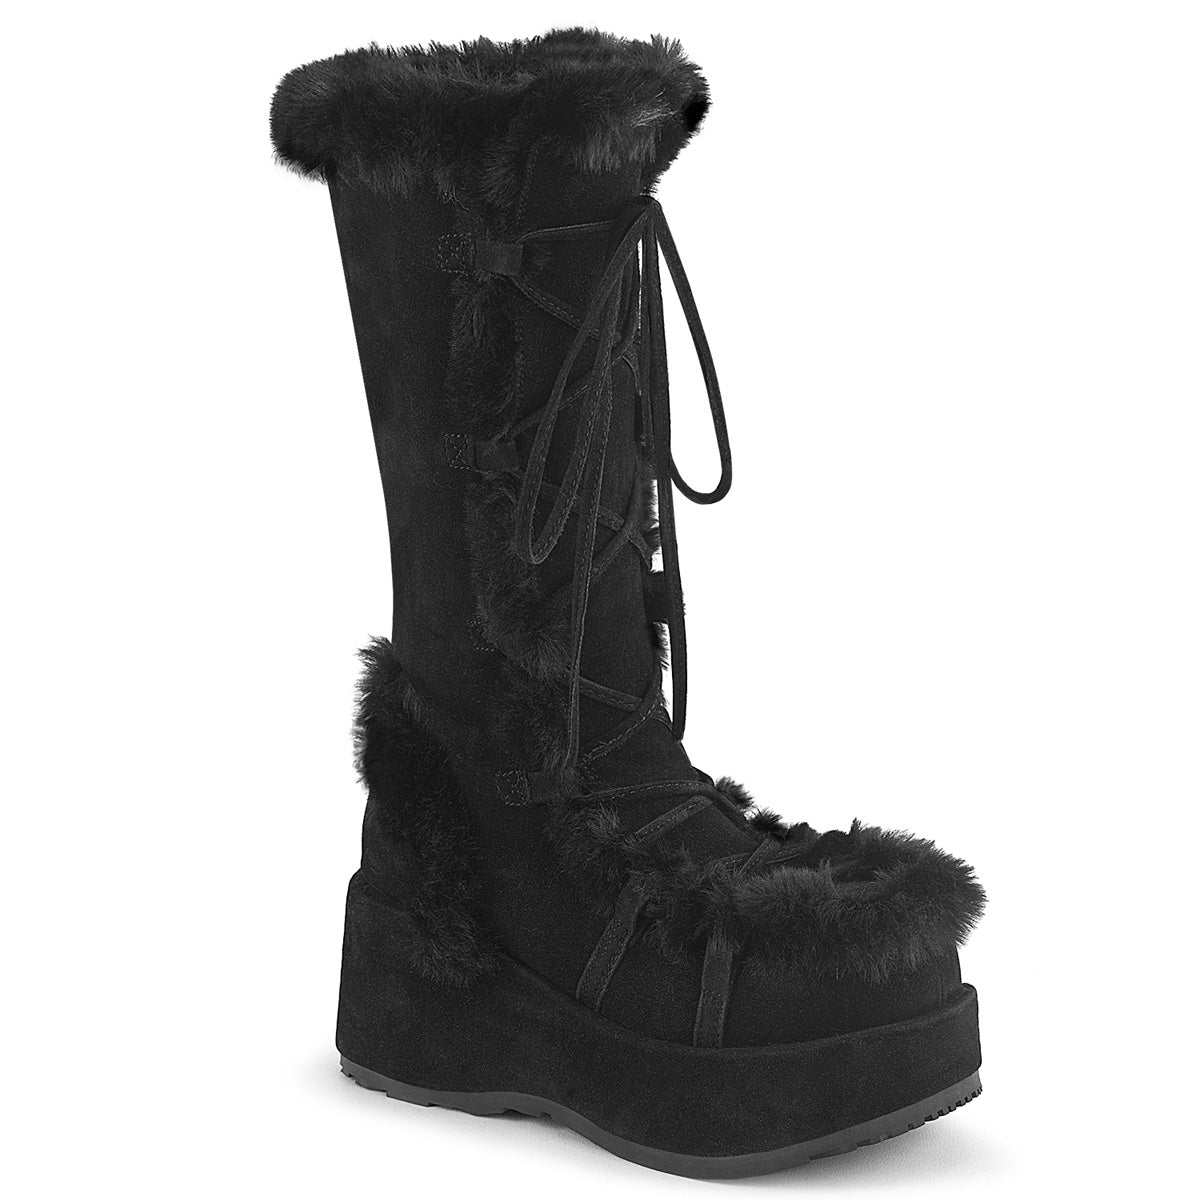 CUBBY-311 Black Suede Mid-Calf Boots